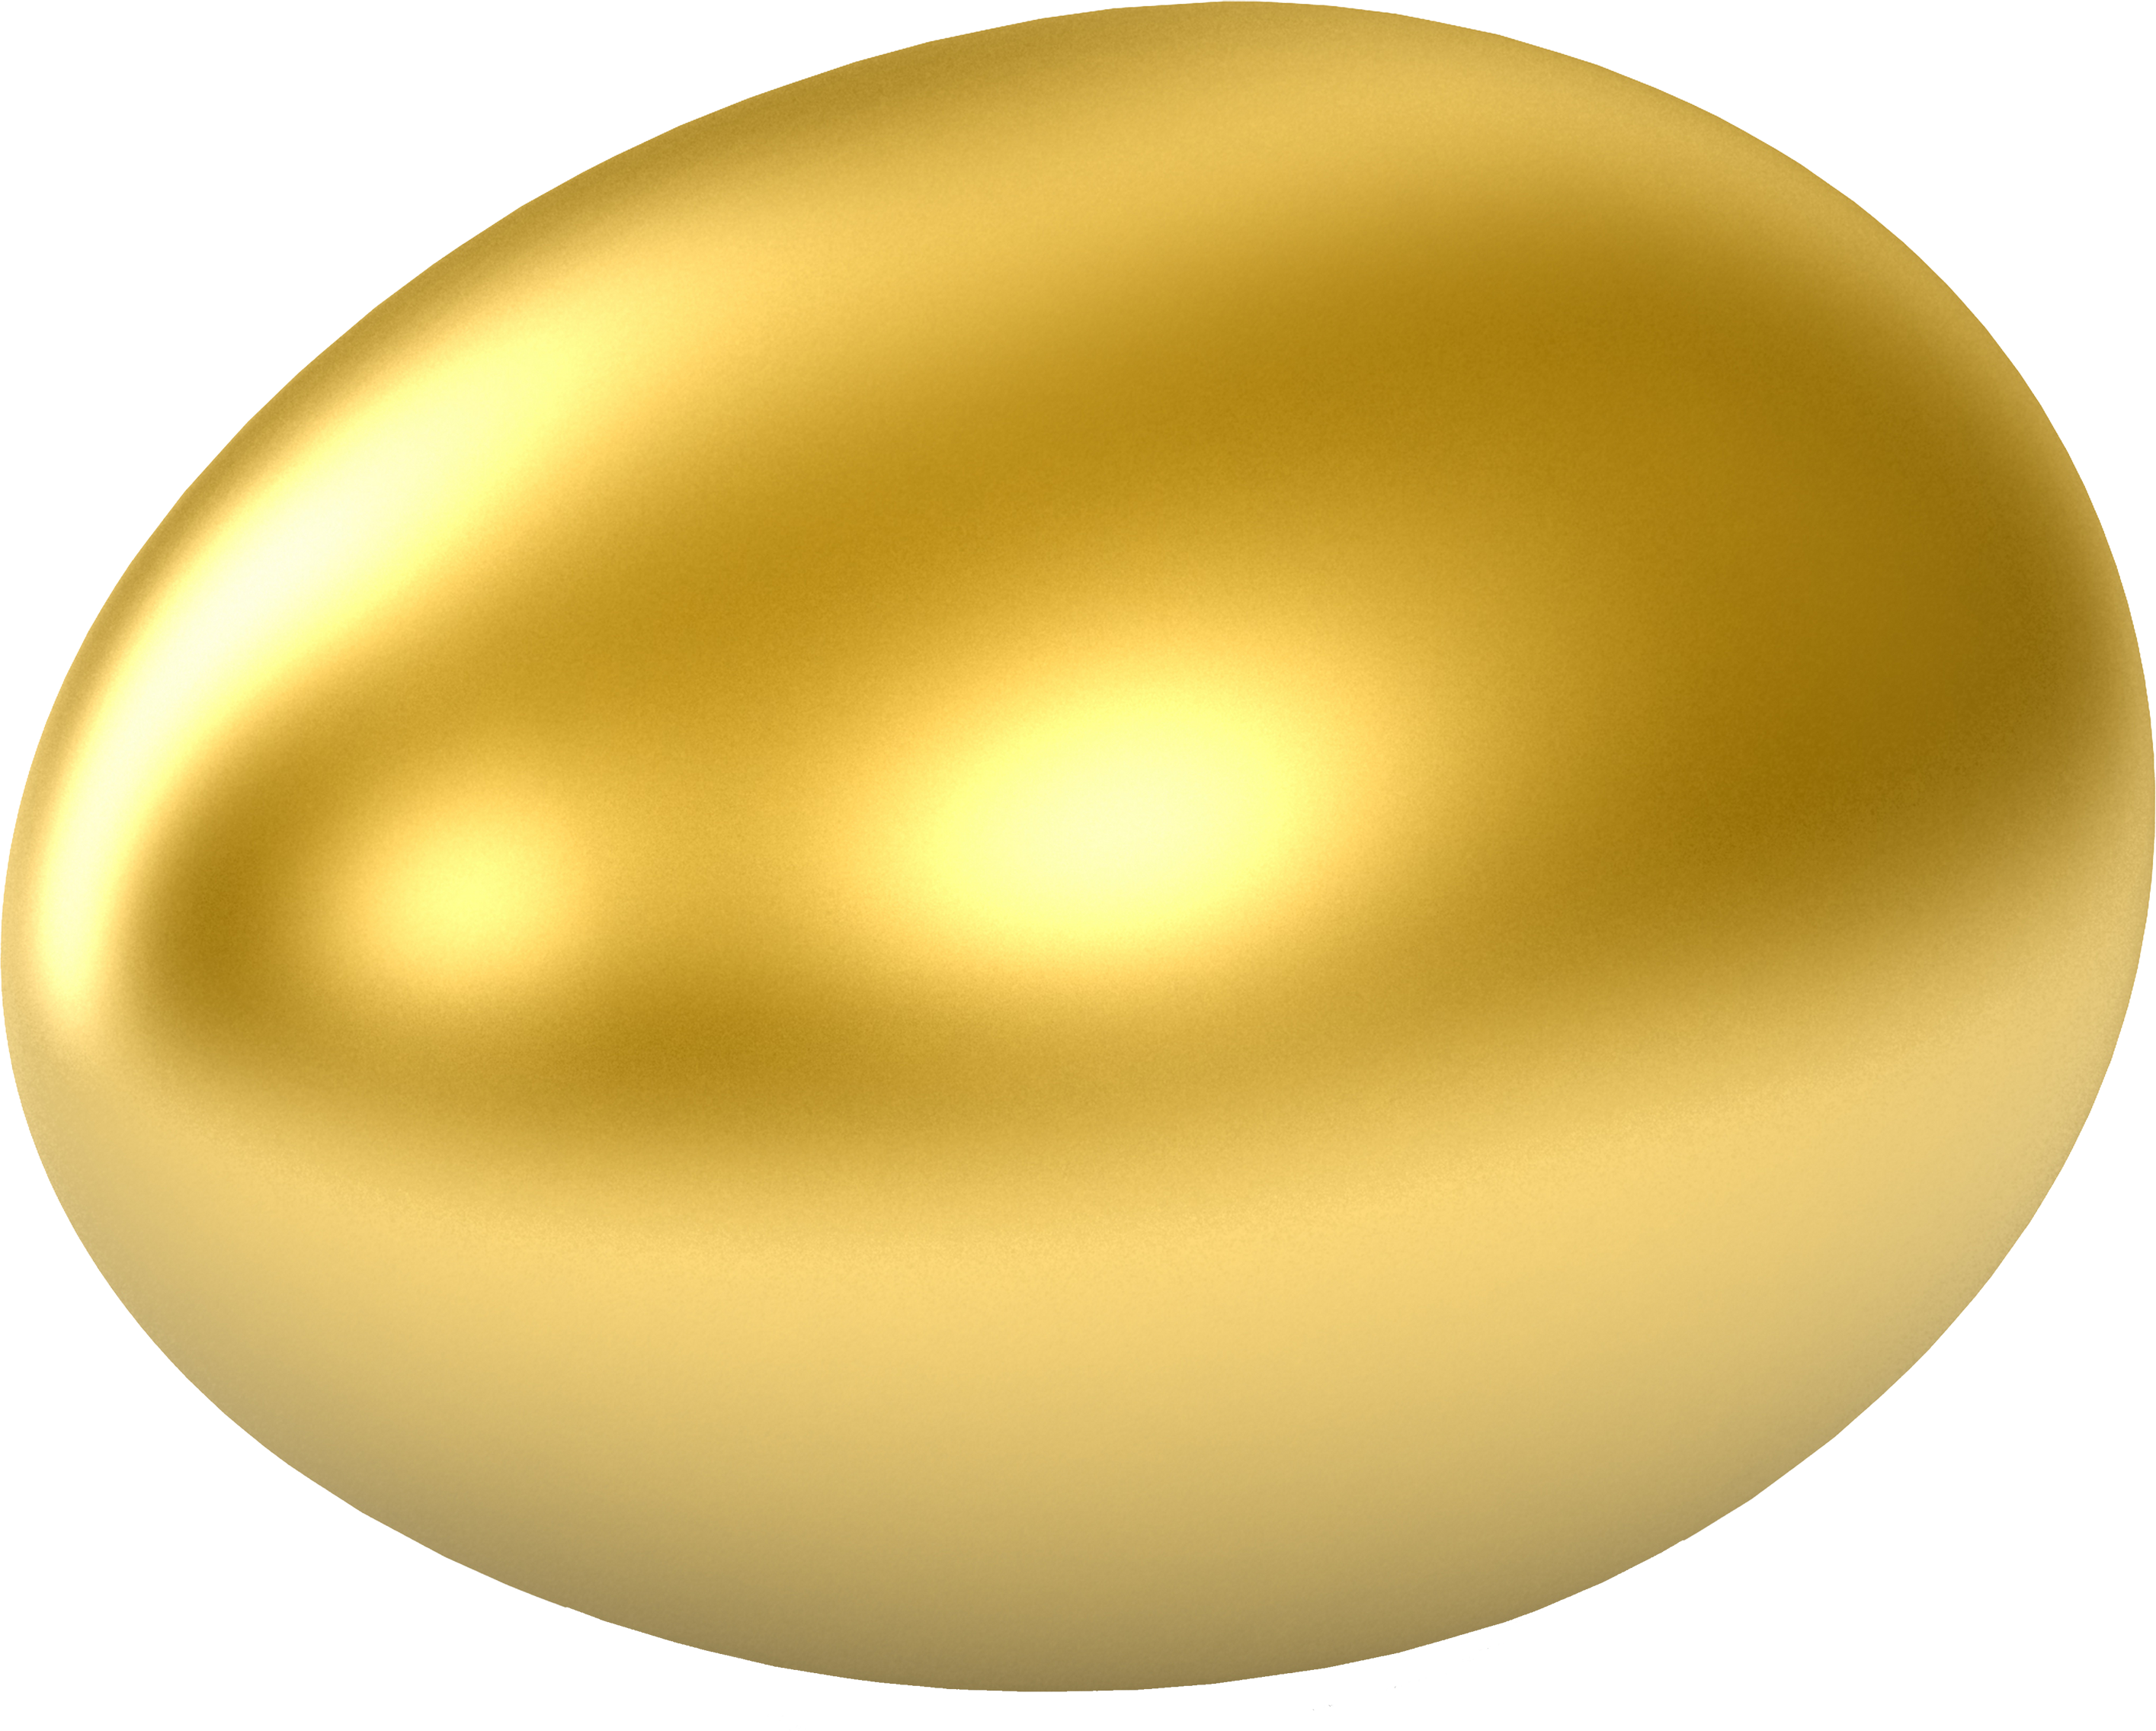 Boiled Egg PNG Image - PurePNG  Free transparent CC0 PNG Image Library